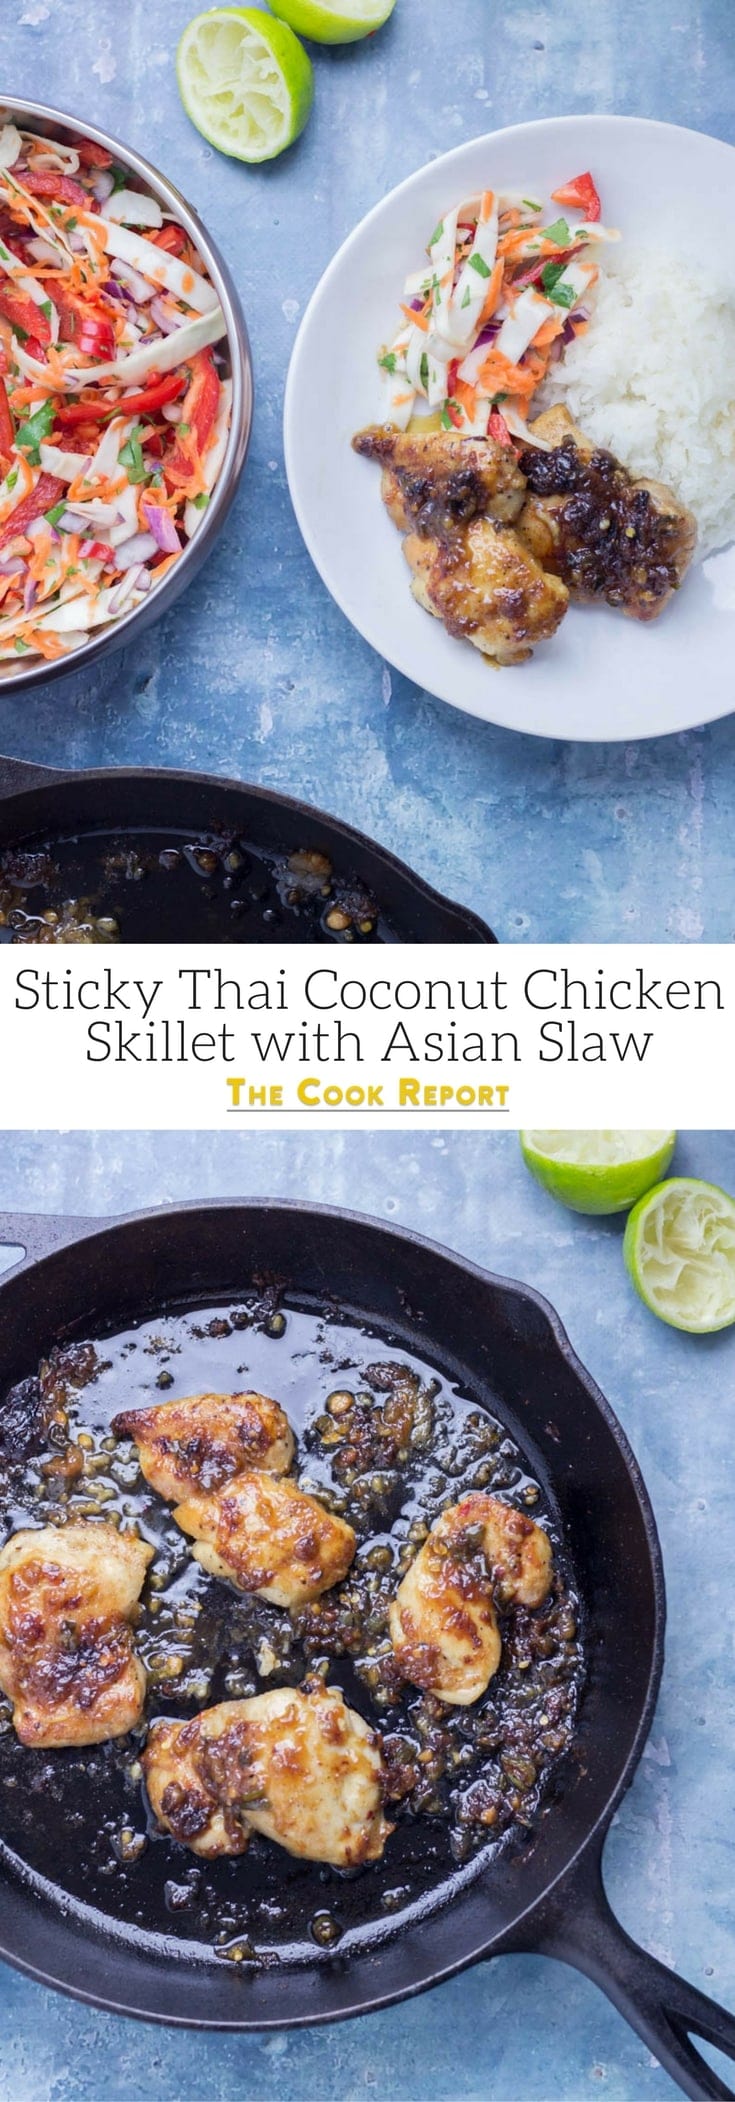 Sticky Thai Coconut Chicken Skillet with Asian Slaw • The Cook Report